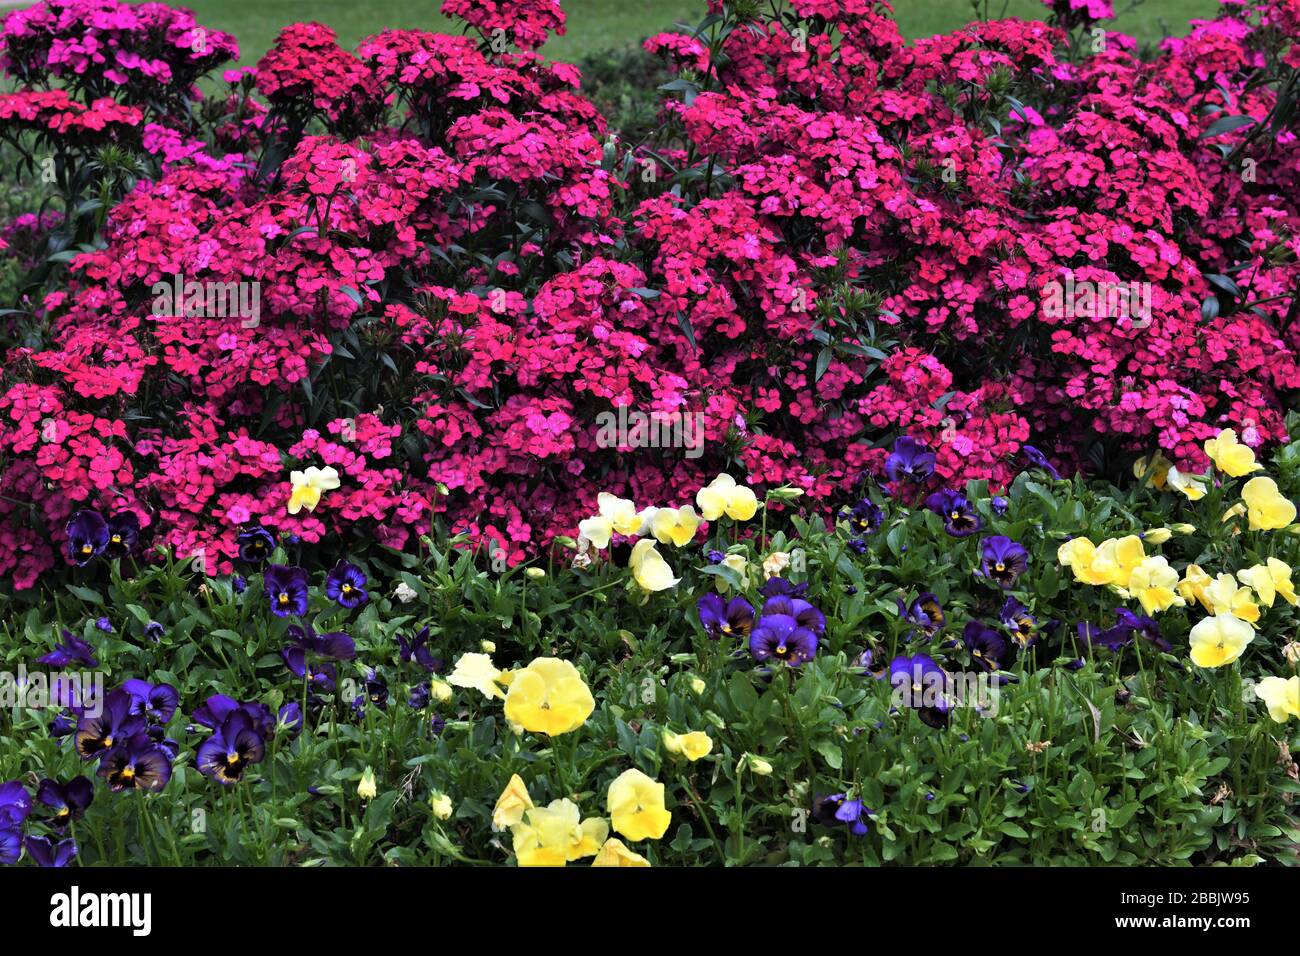 A bed of beautiful multicolored pansies. Stock Photo